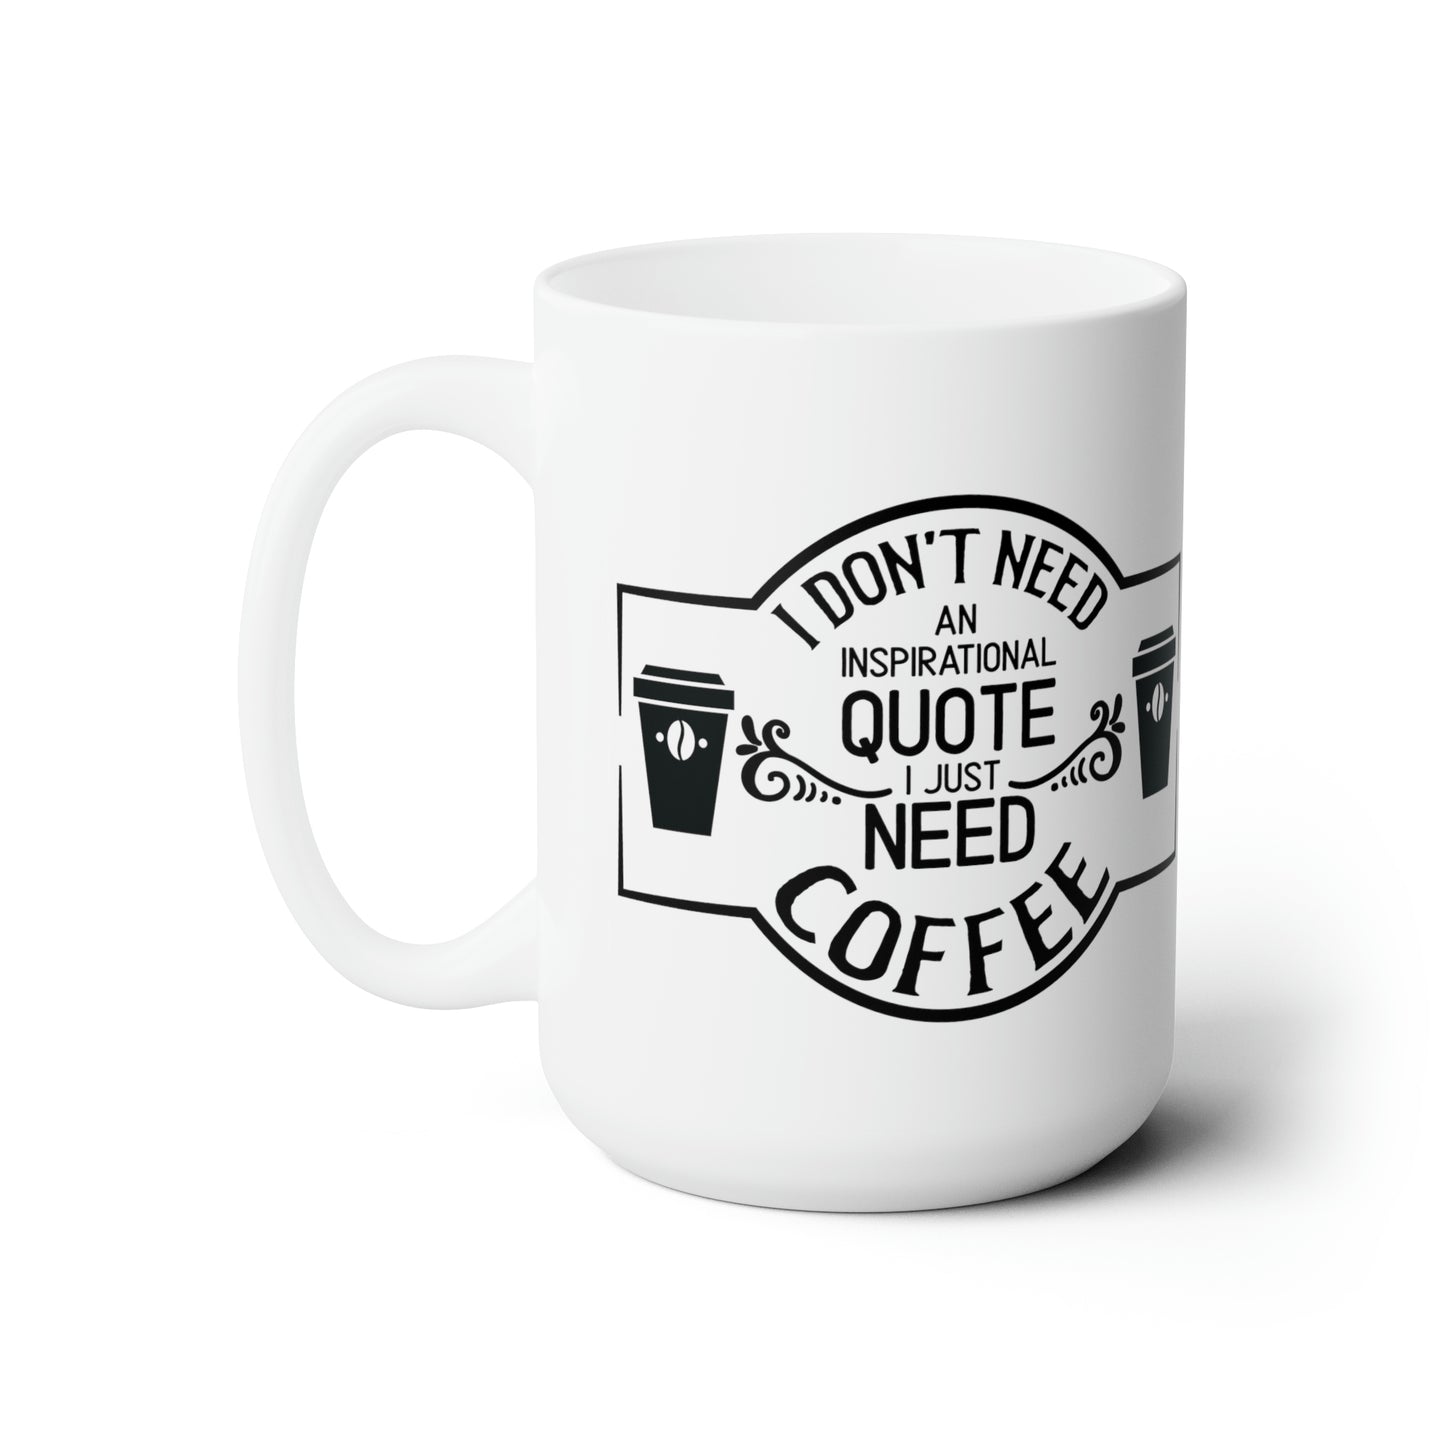 I dont need and inspirational quote, I need coffee. 15oz